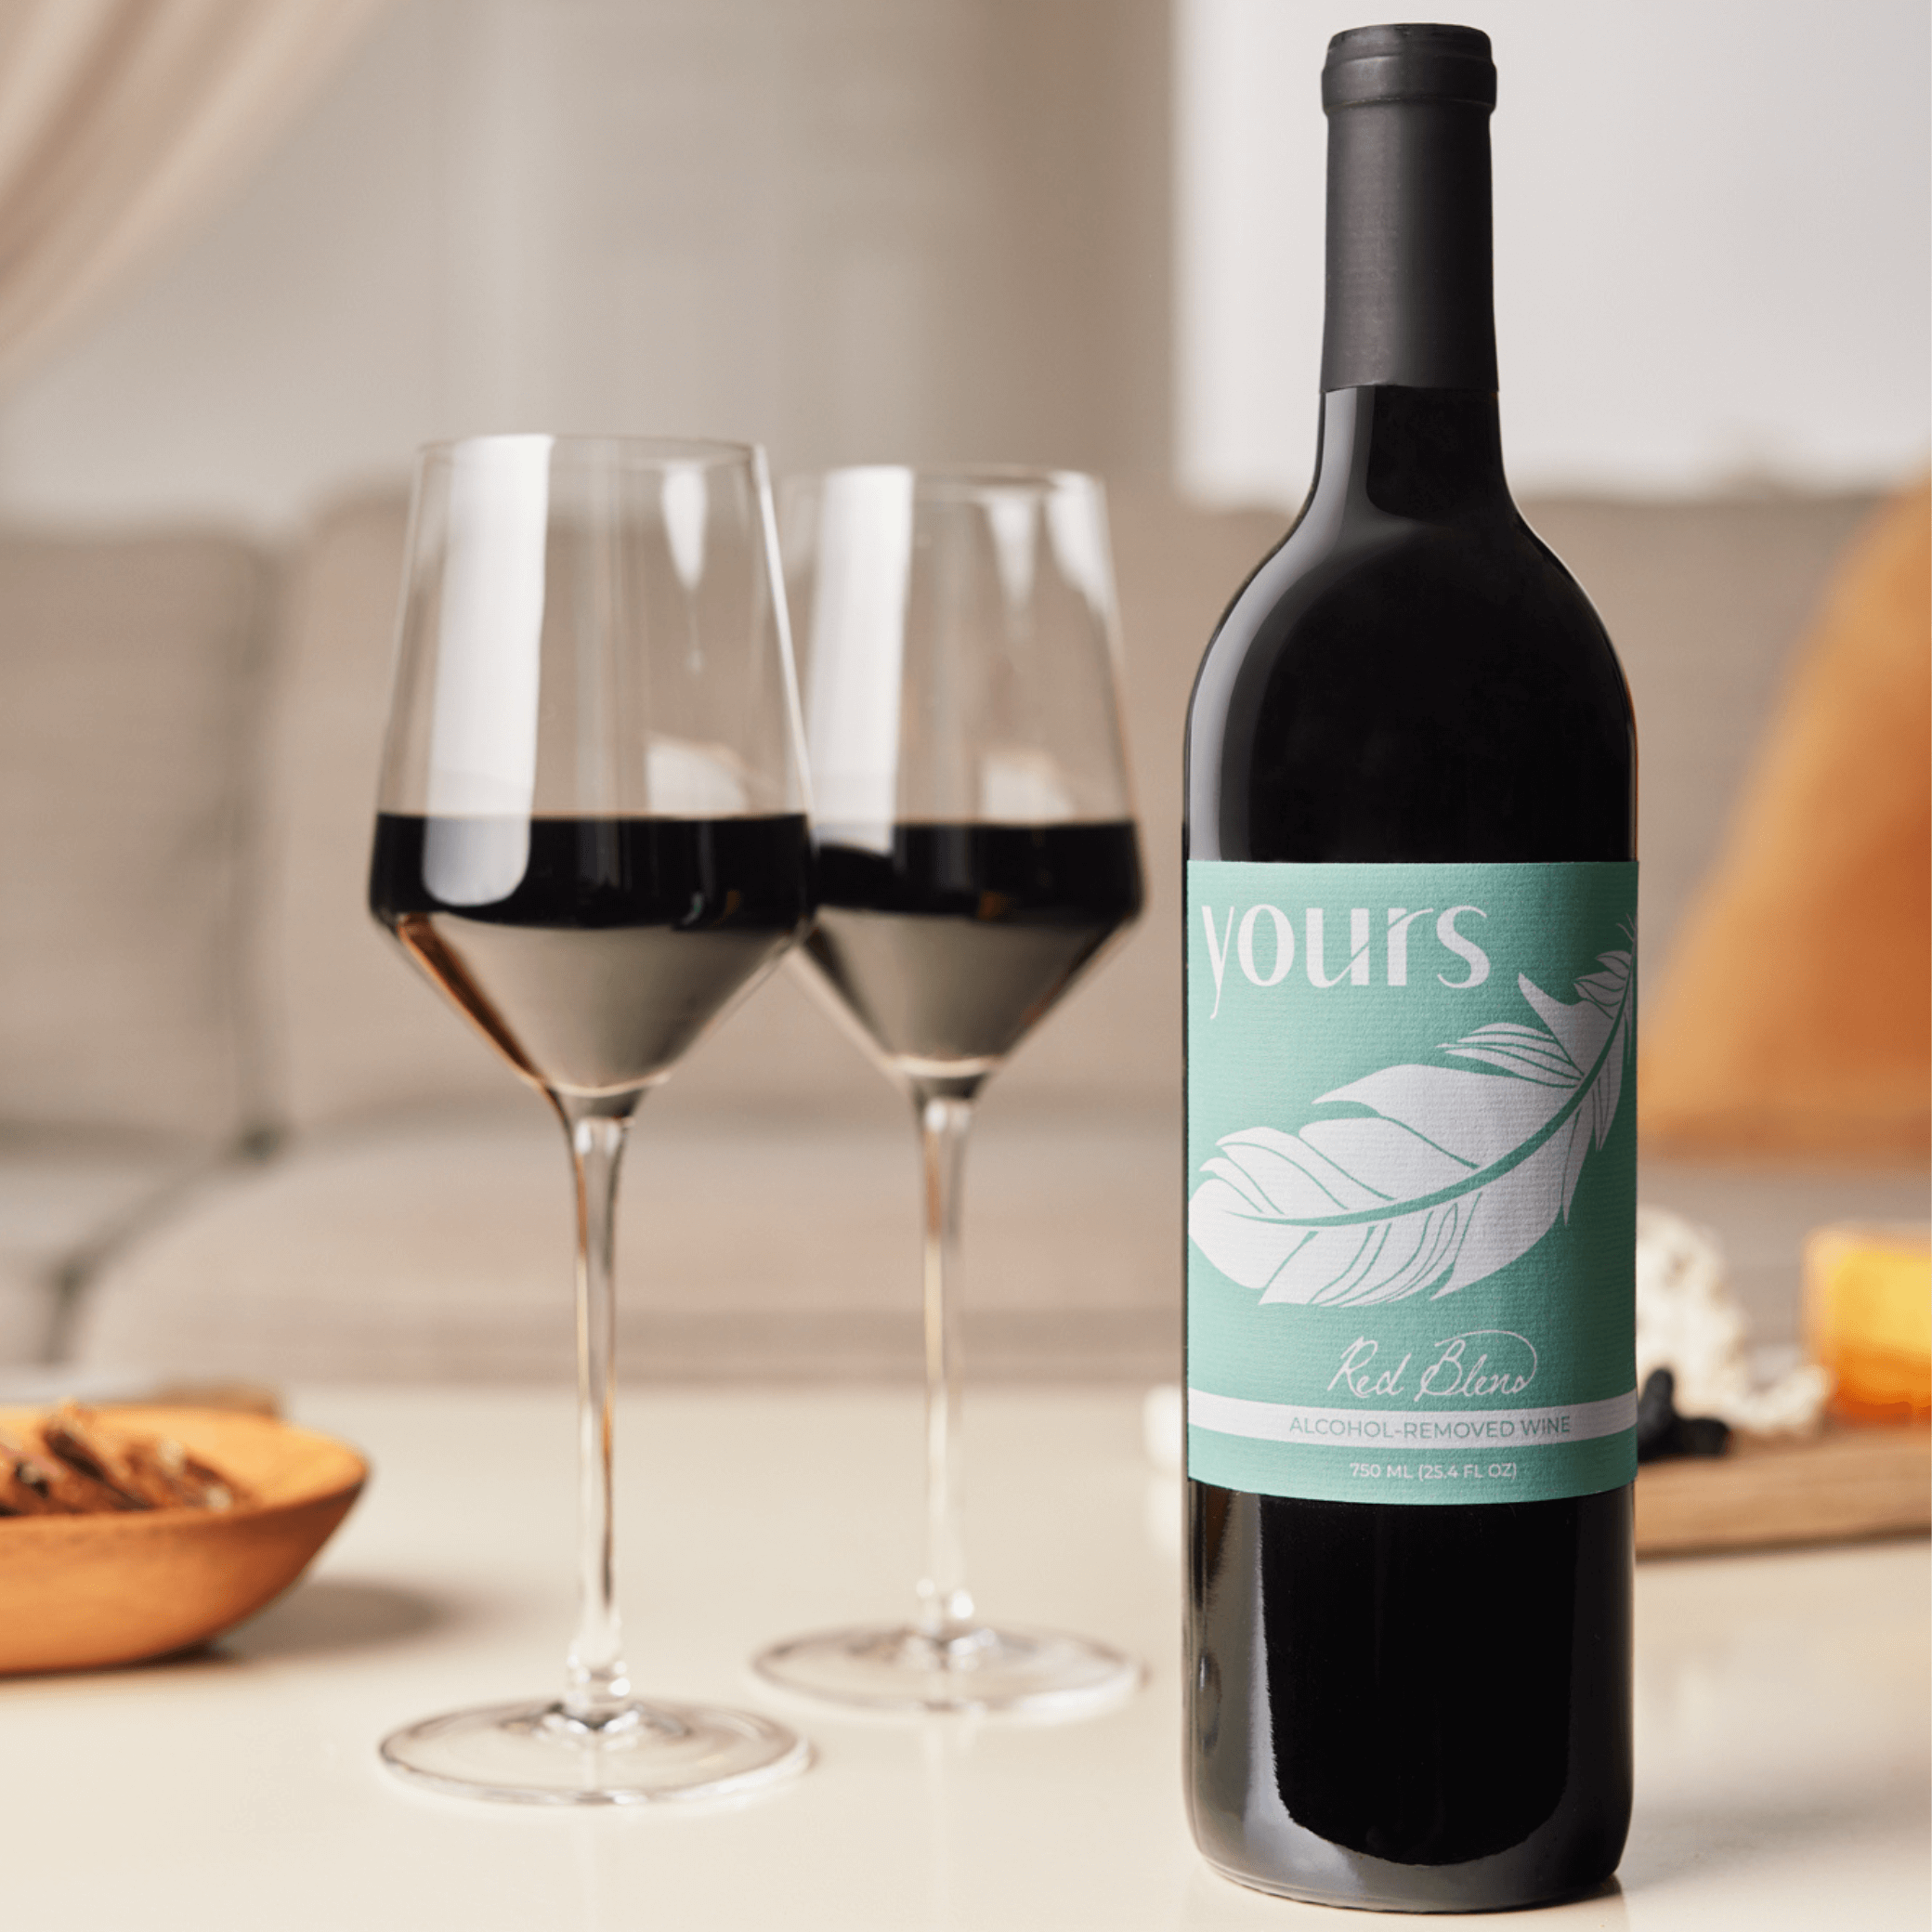 YOURS Non-Alcoholic Award Winning California Red Blend Wine with Two Glasses